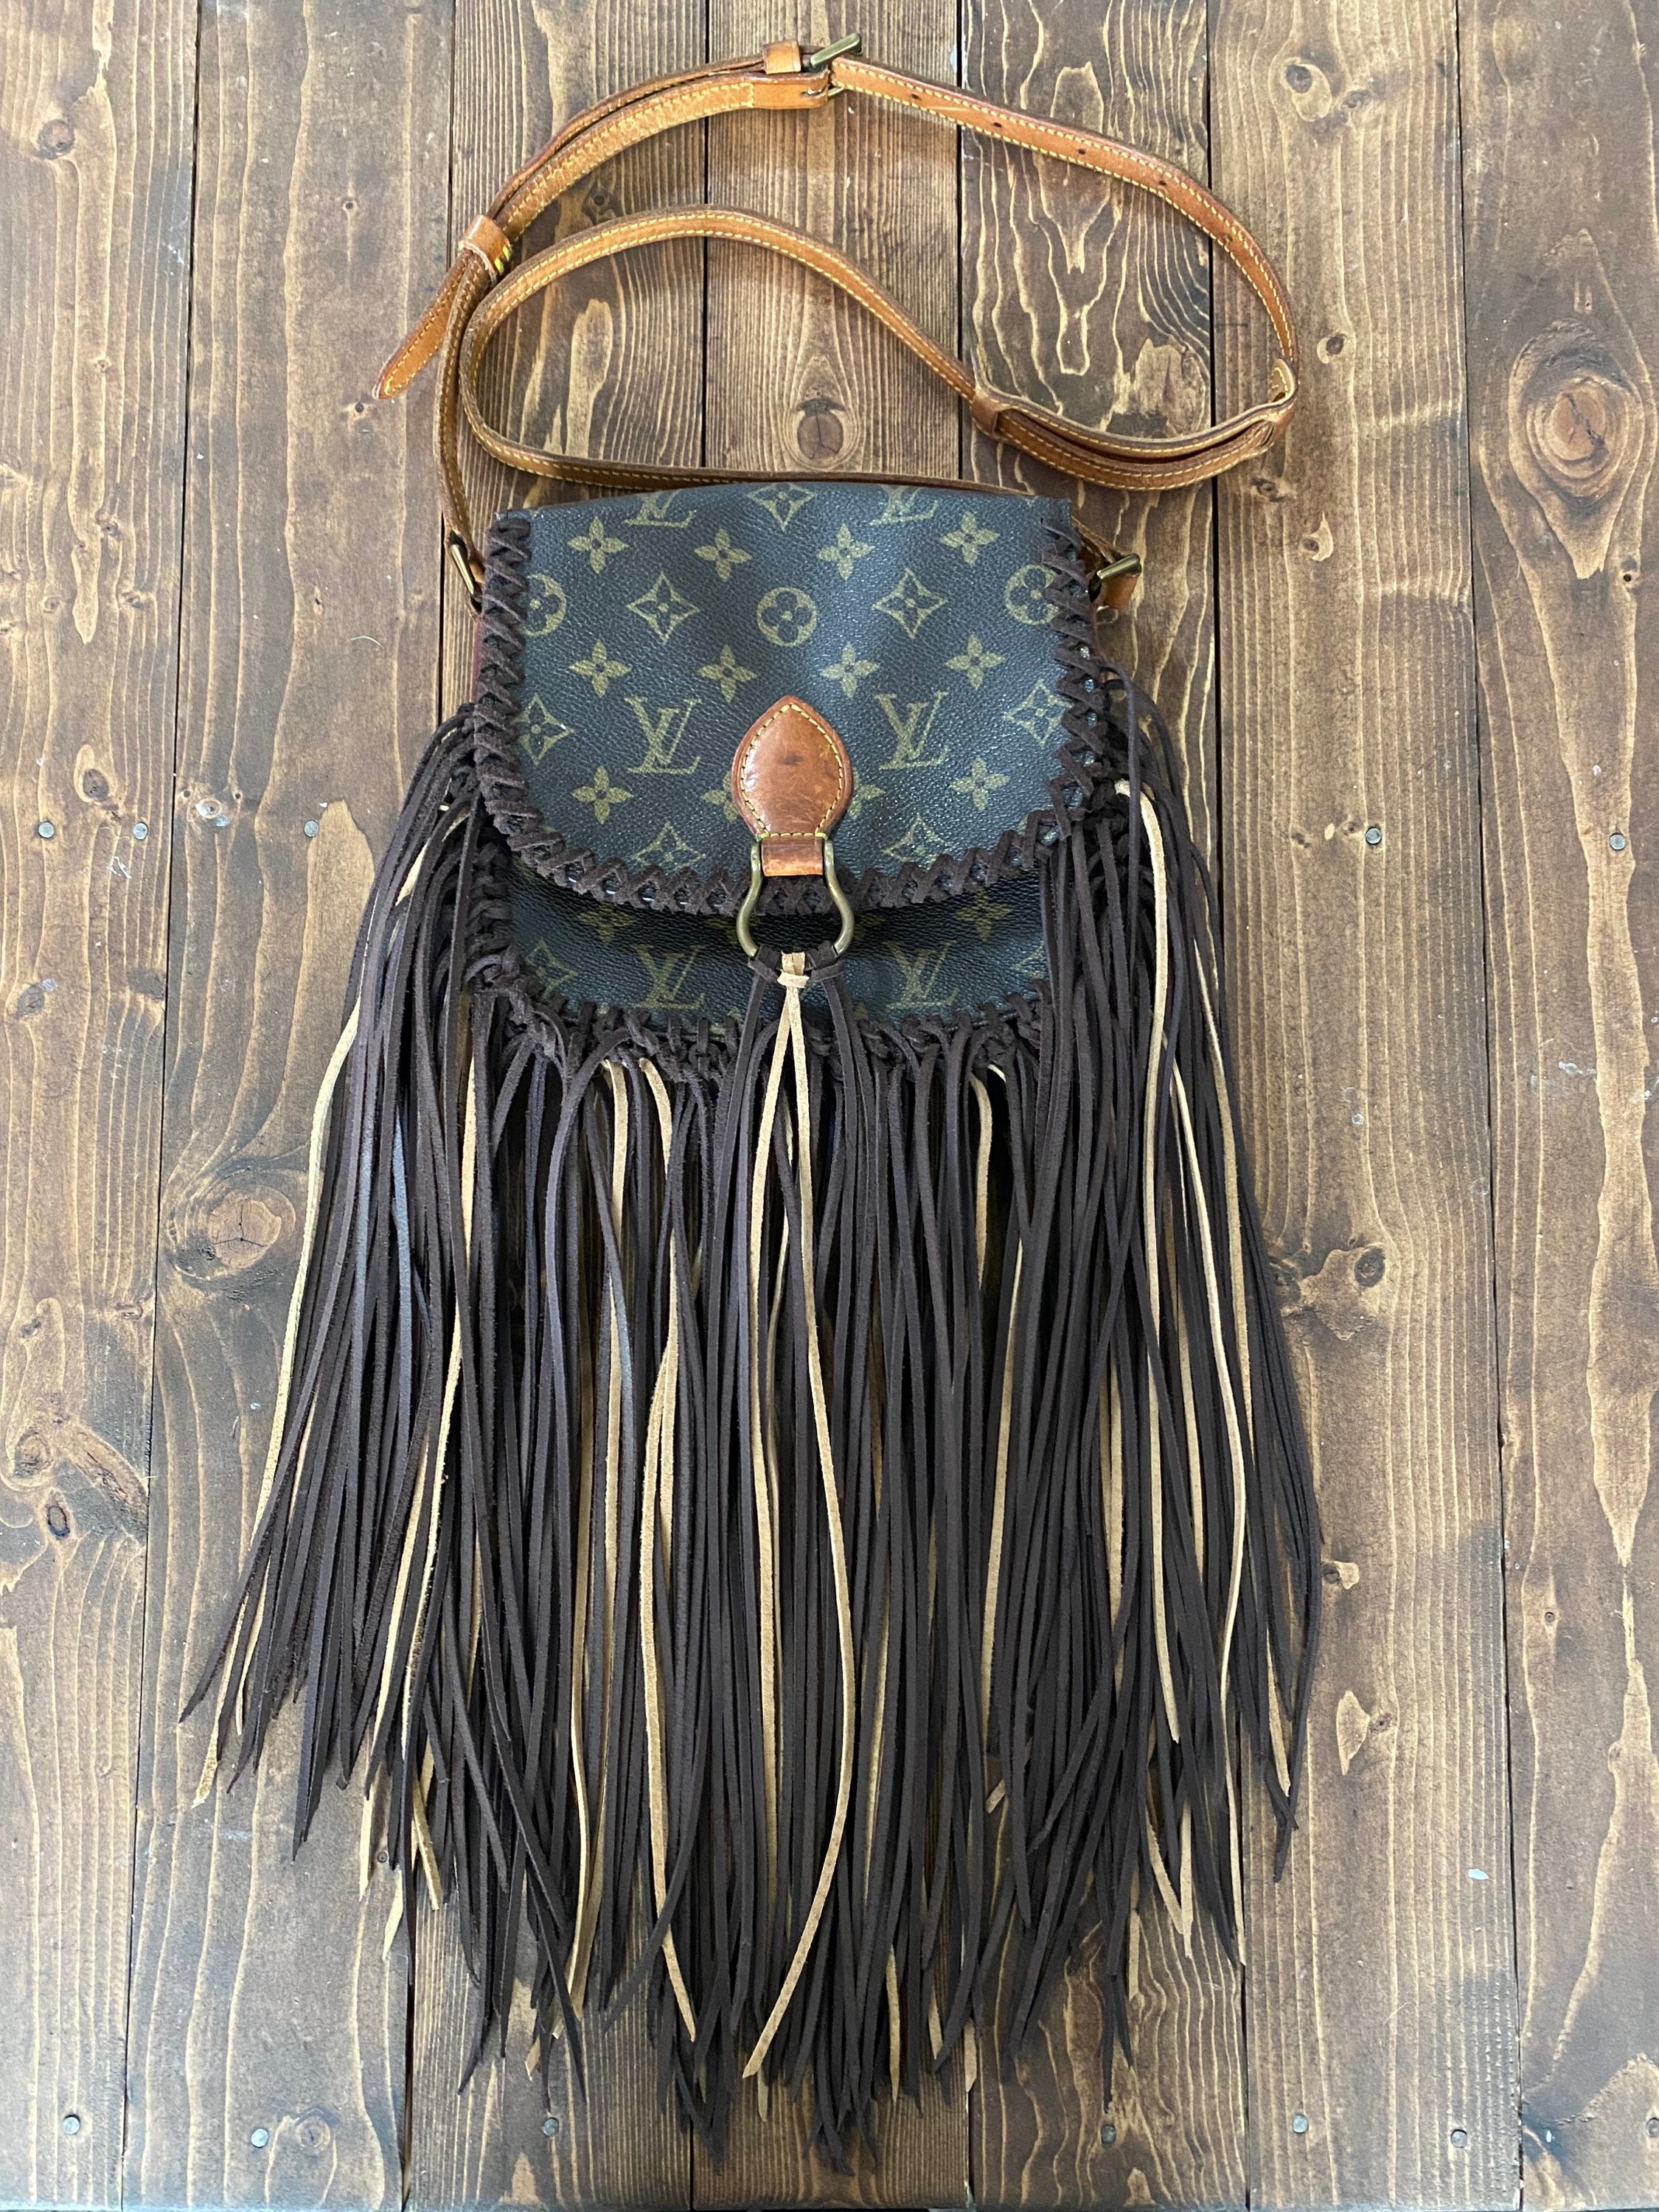 Louis Vuitton vintage and upcycled boho bags, purses, keychains